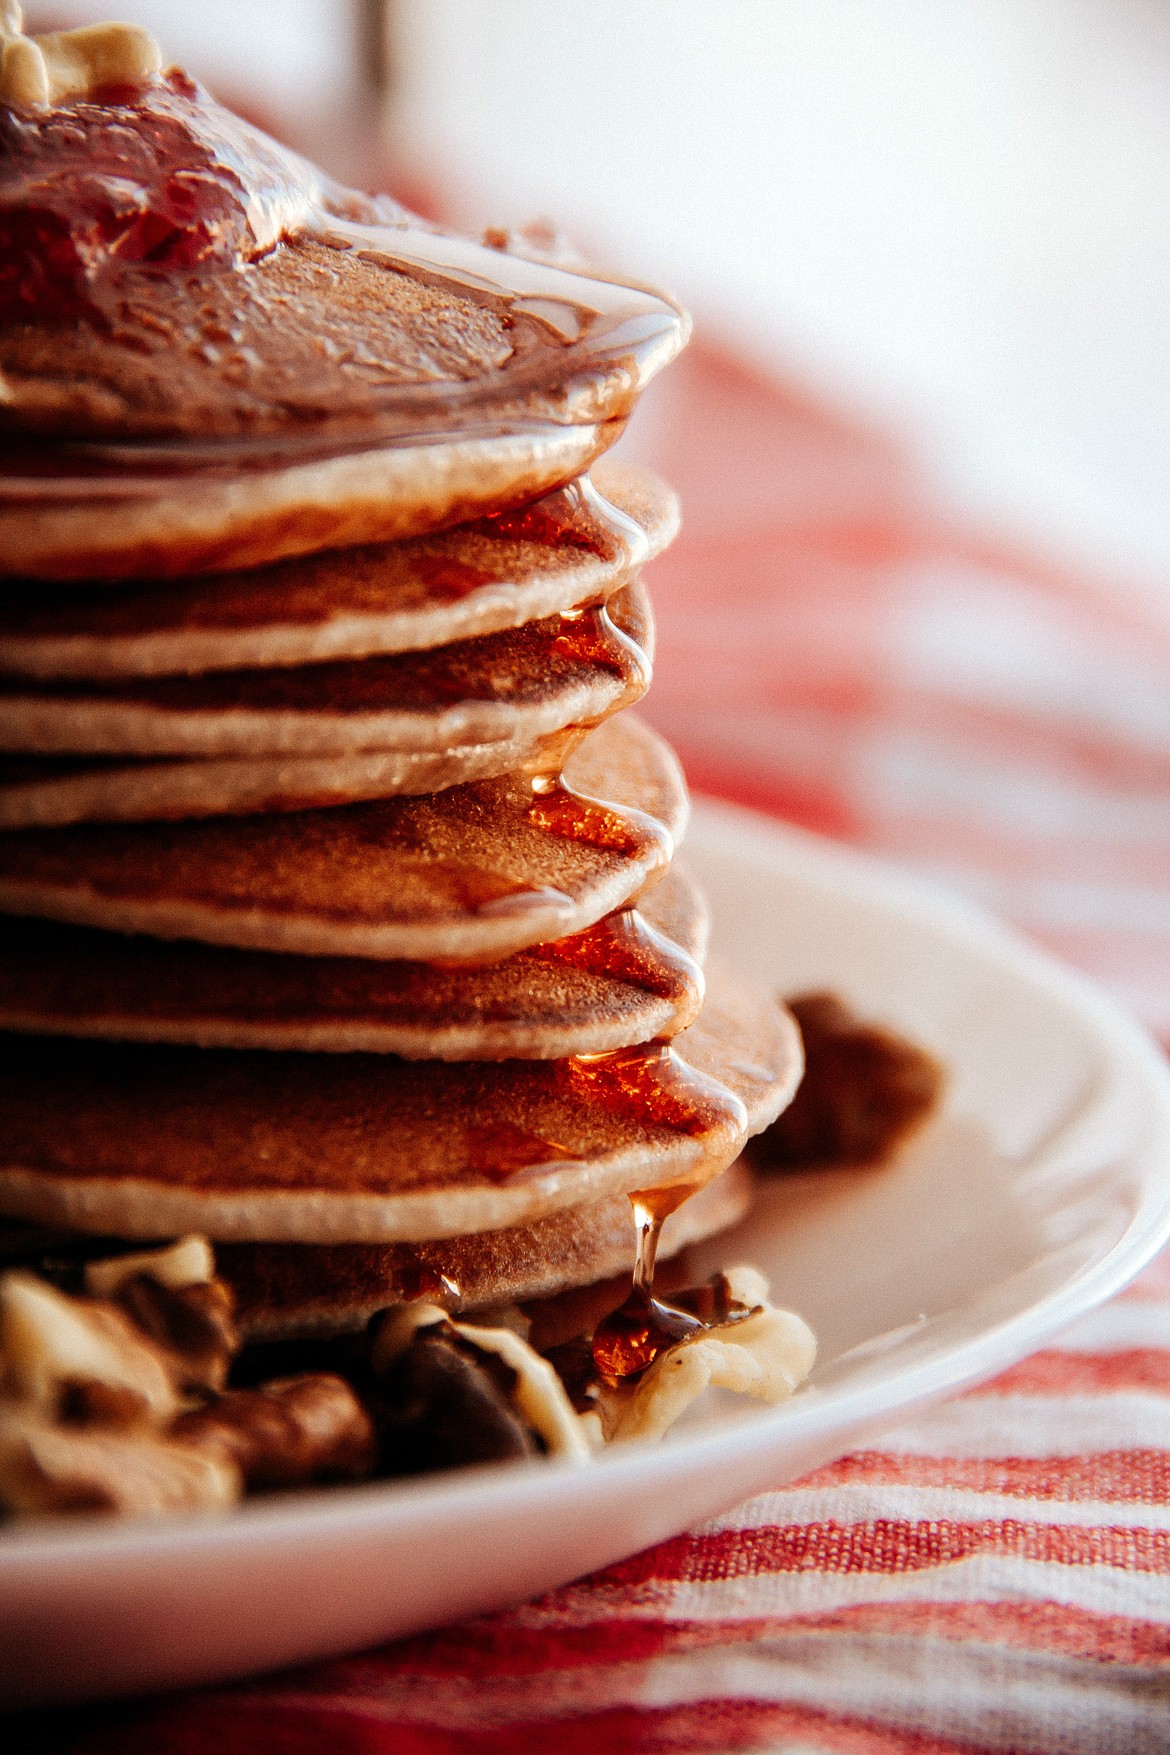 Pecan make a delightful addition to pancakes.